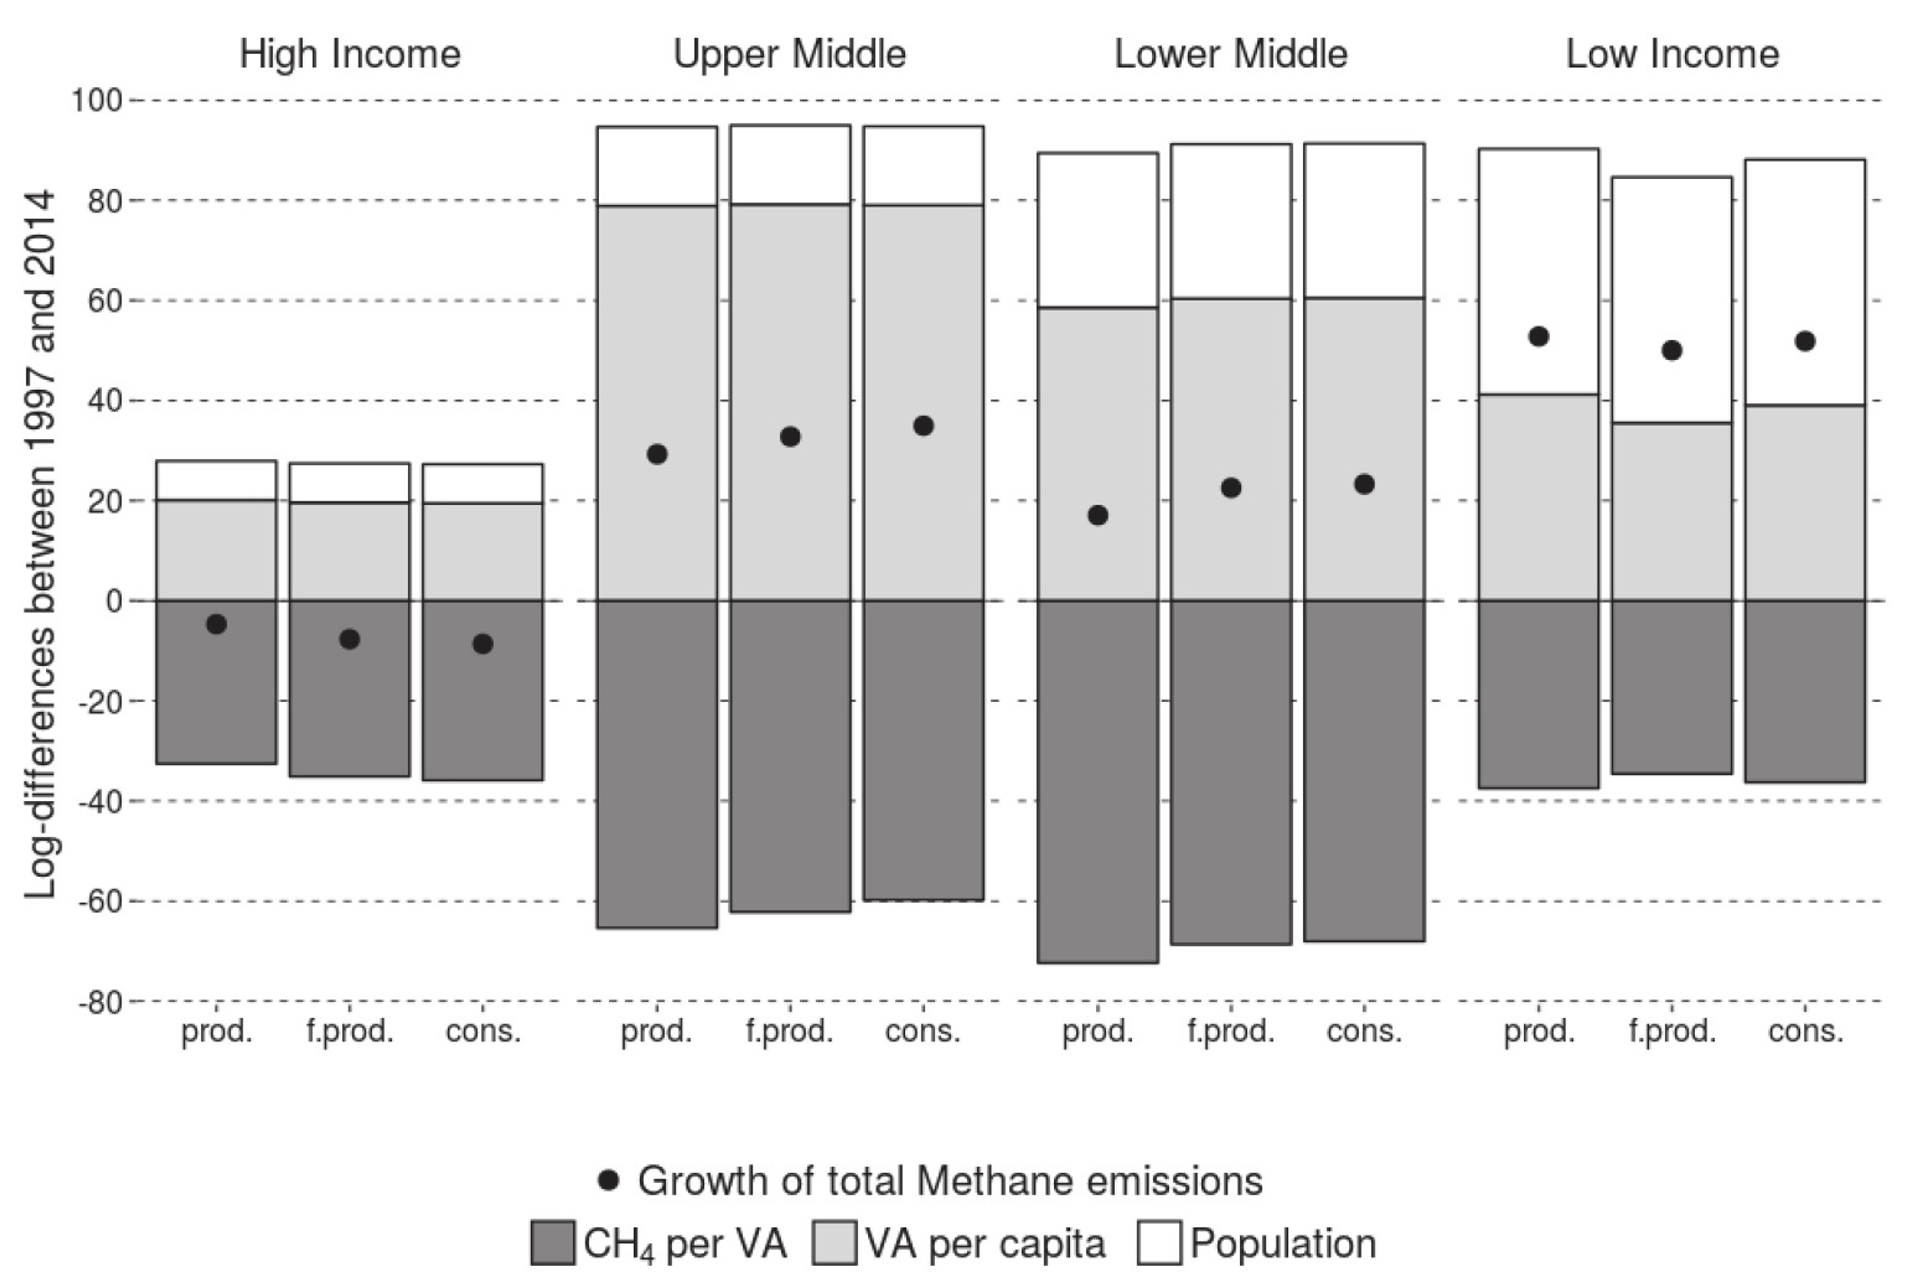 Kaya-based decompositions of the growth rate of methane emissions (1997—2014)